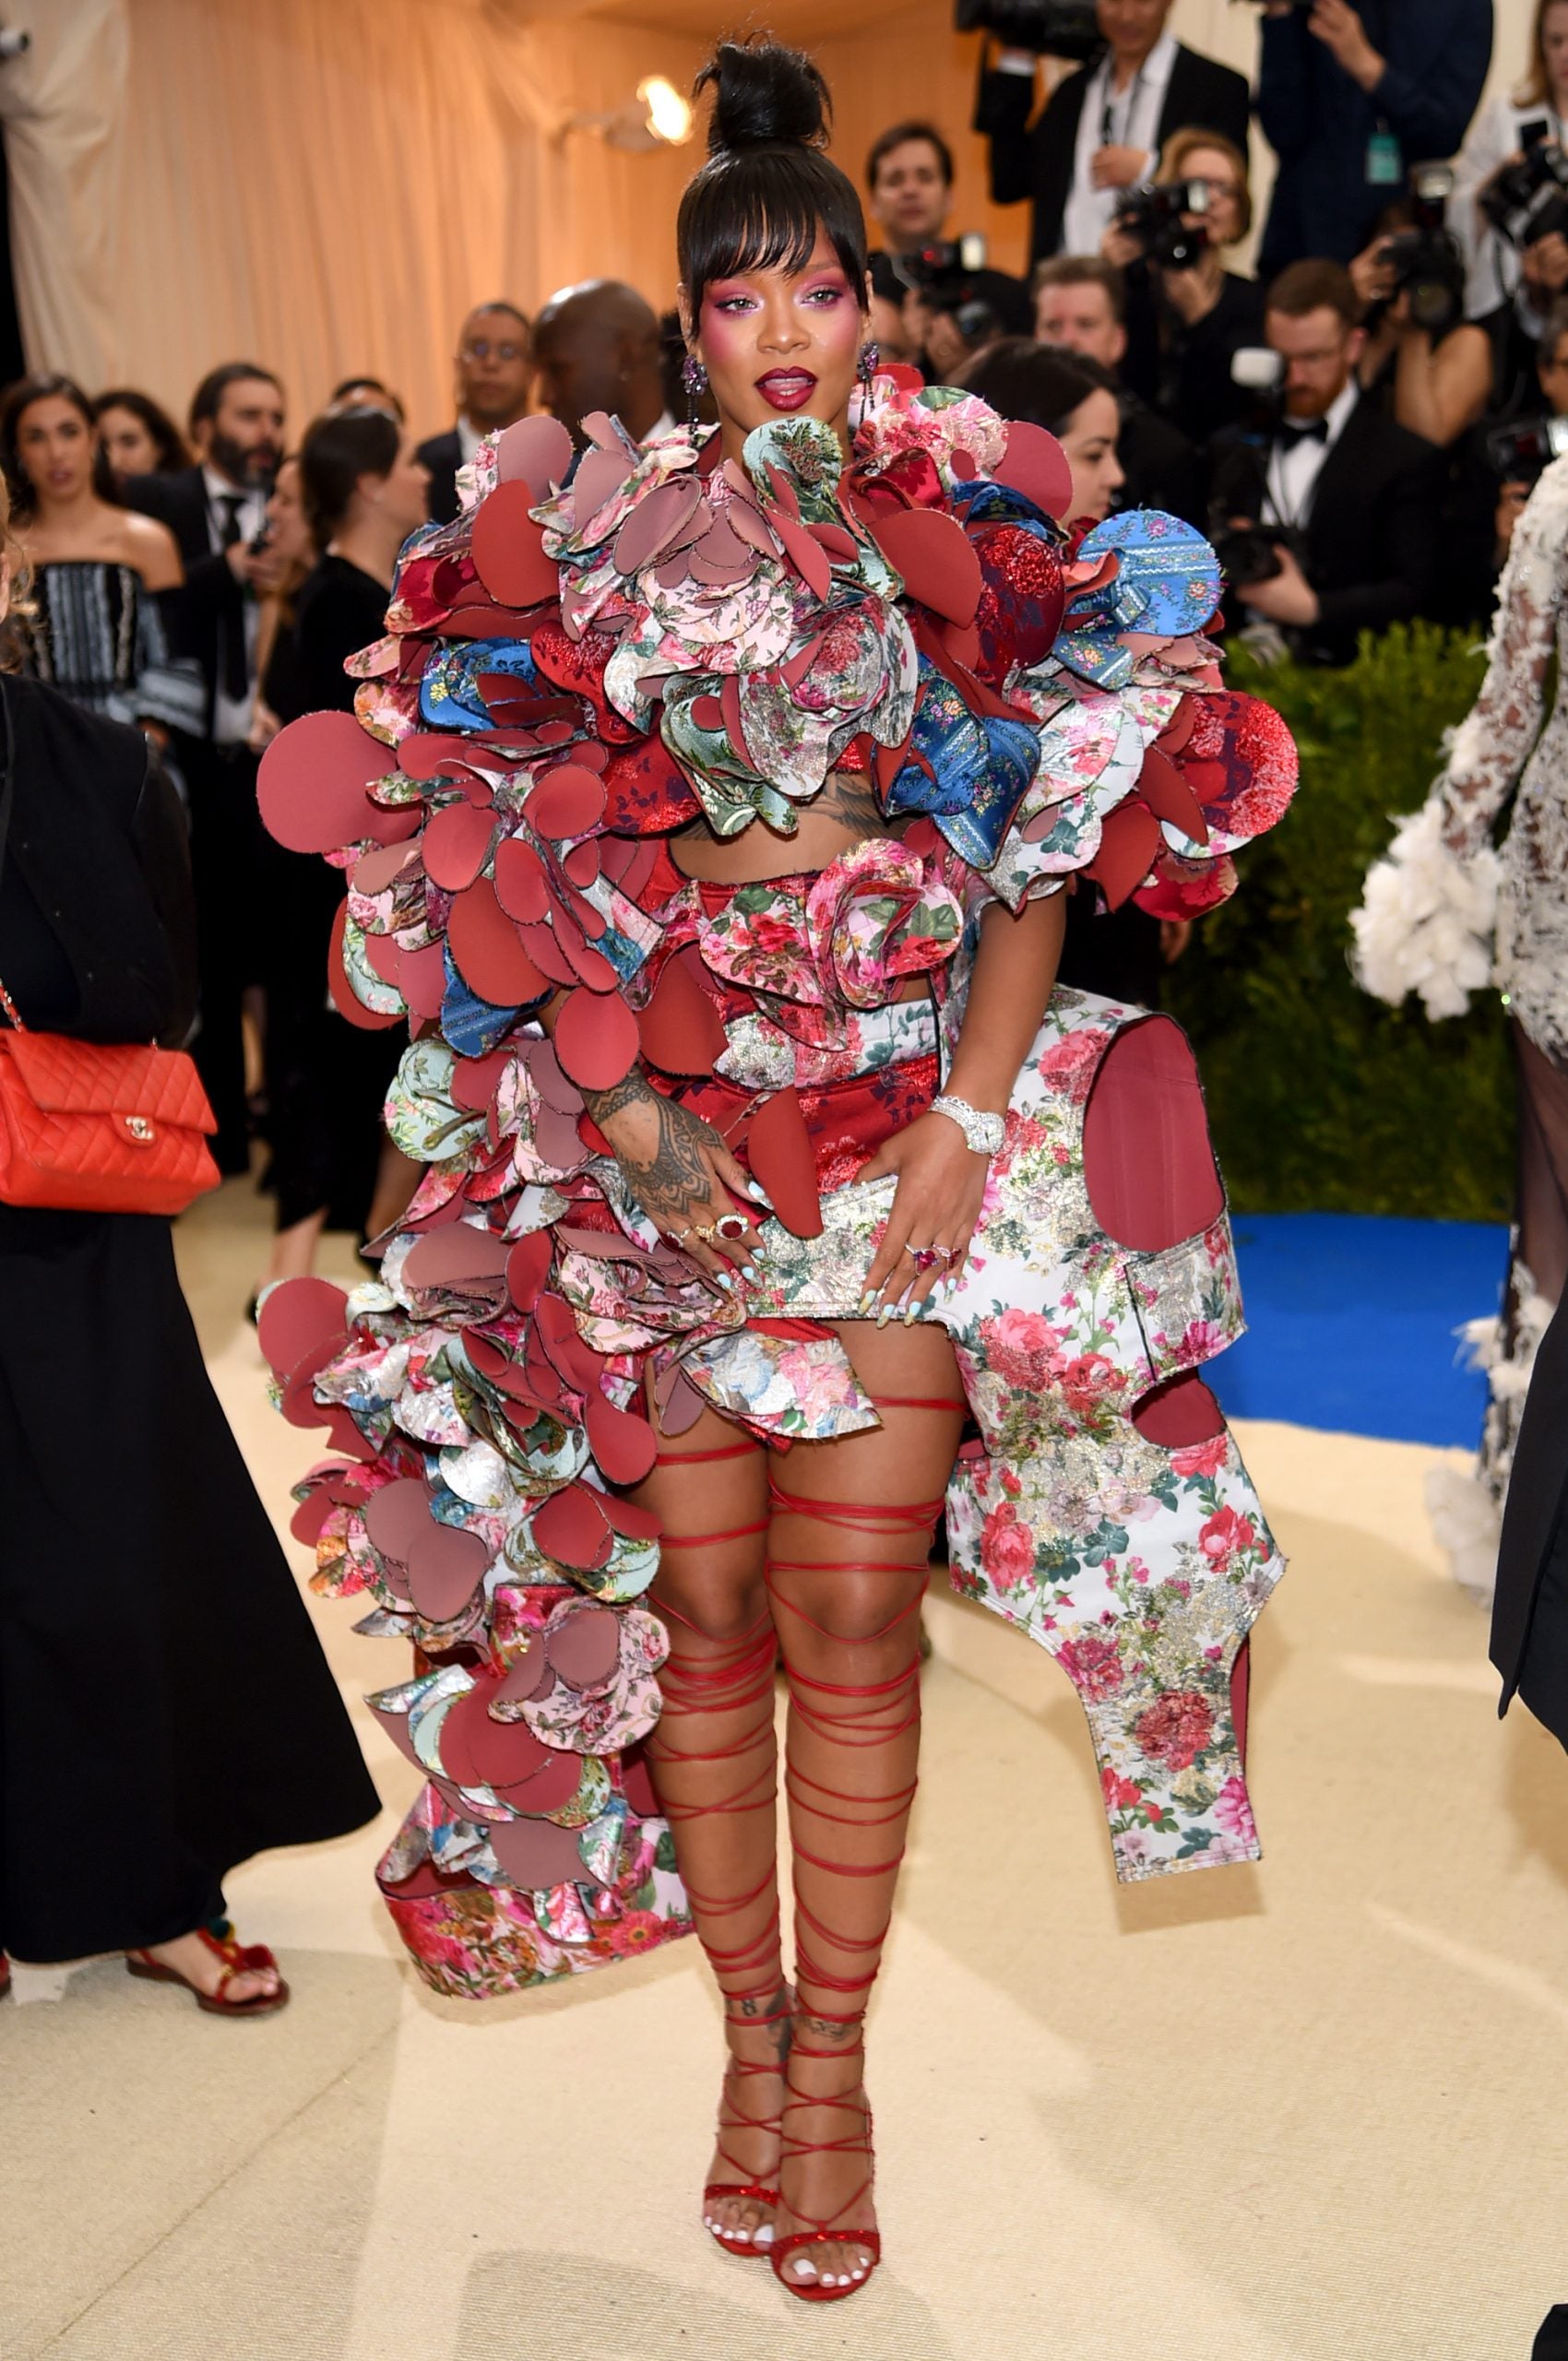 30 Times Black Women Made The Met Gala Red Carpet Unforgettable